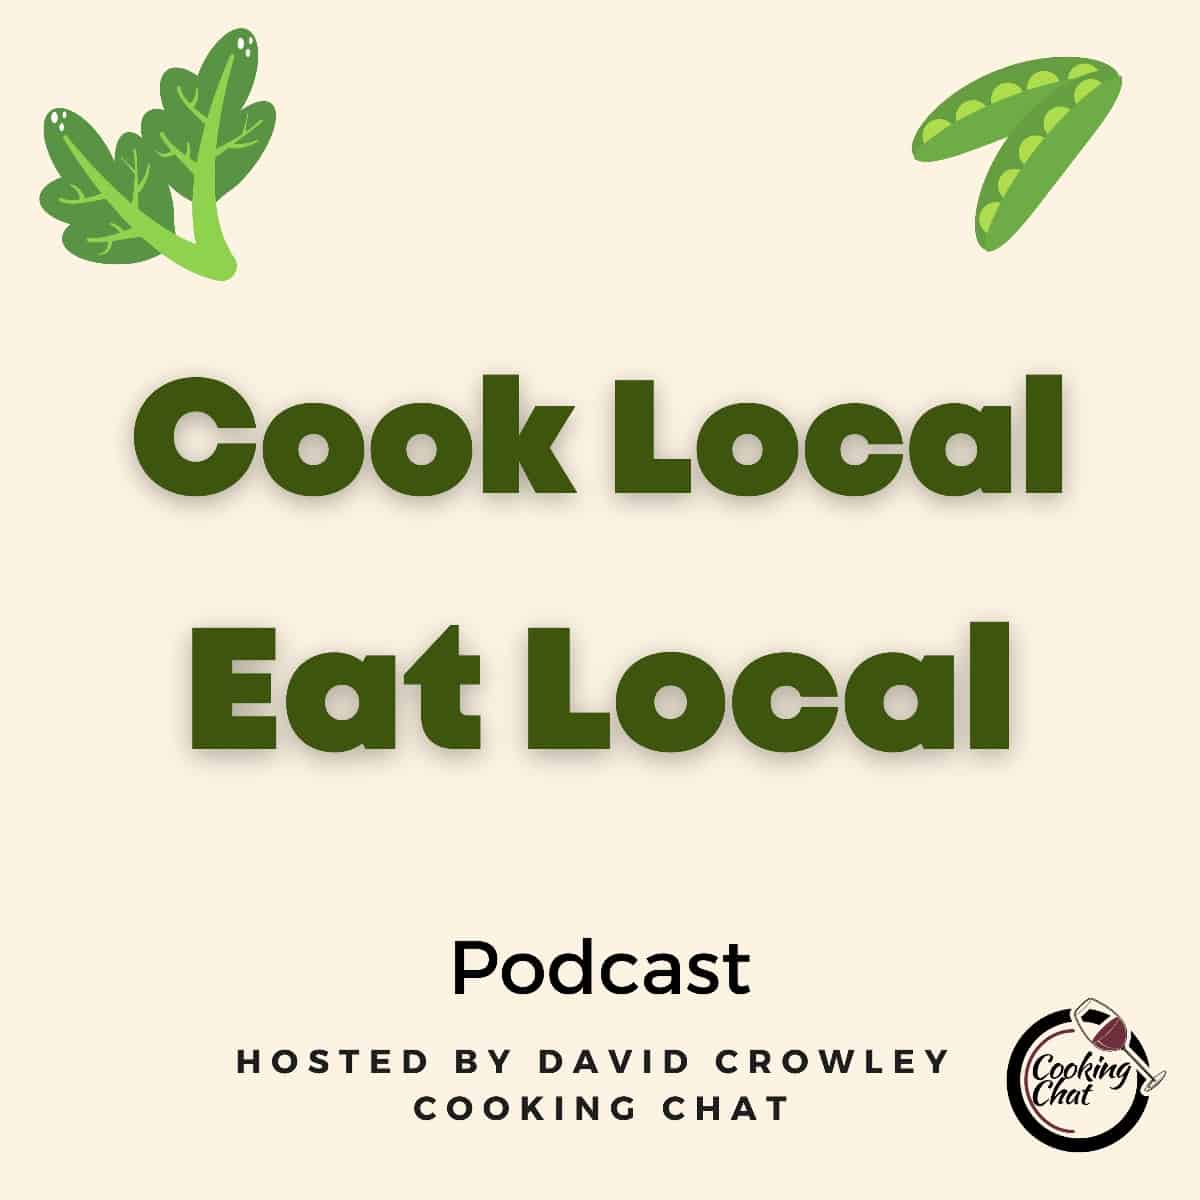 Logo for the Cook Local Eat Local Podcast, with green vegetables above the lettering.